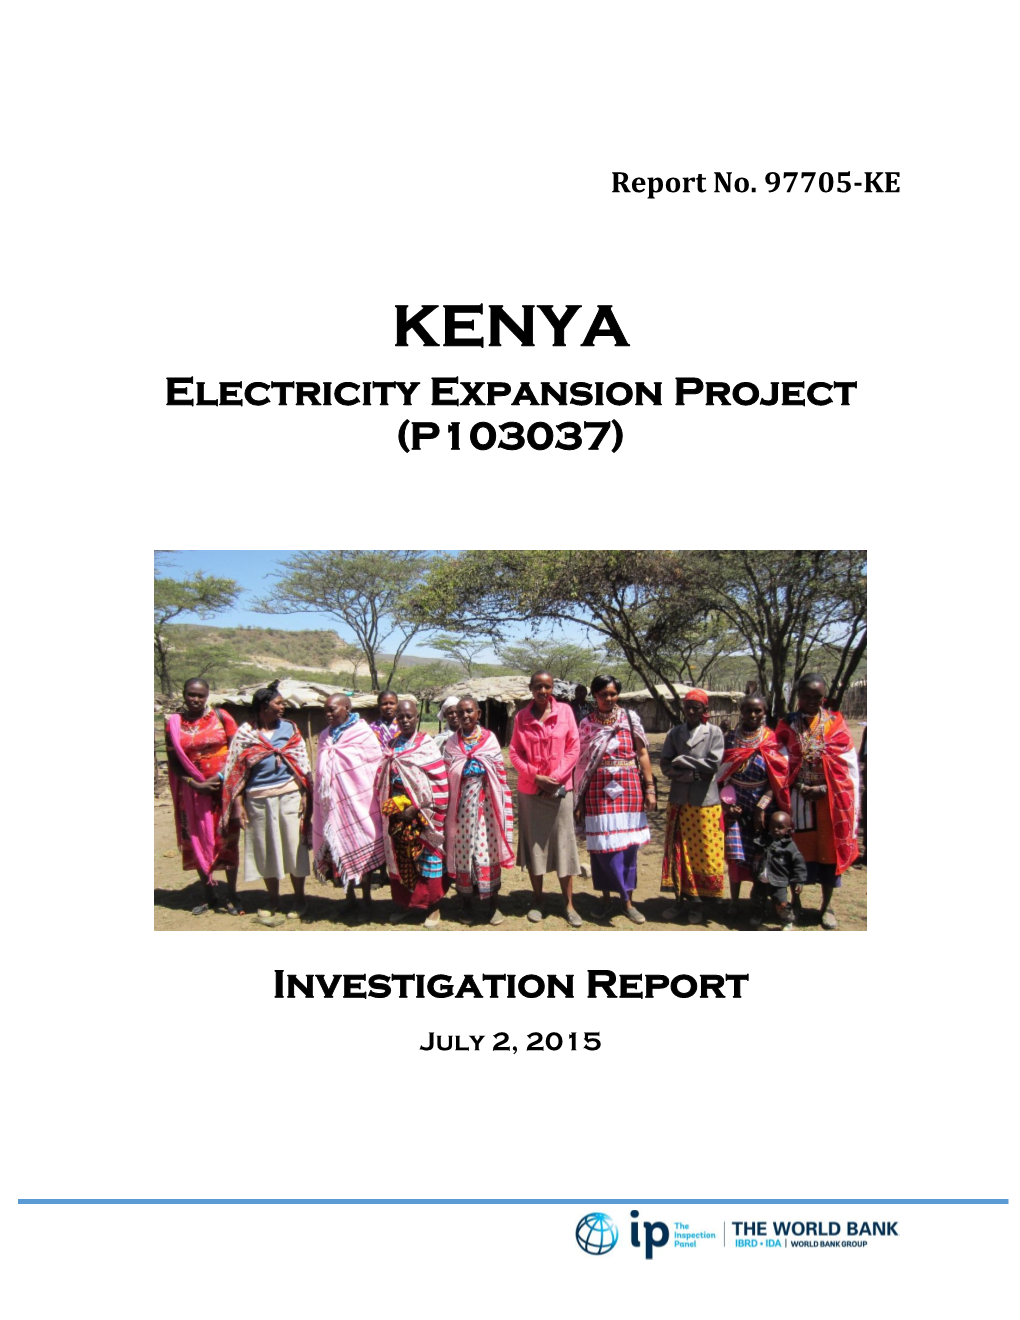 Electricity Expansion Project (P103037) Investigation Report